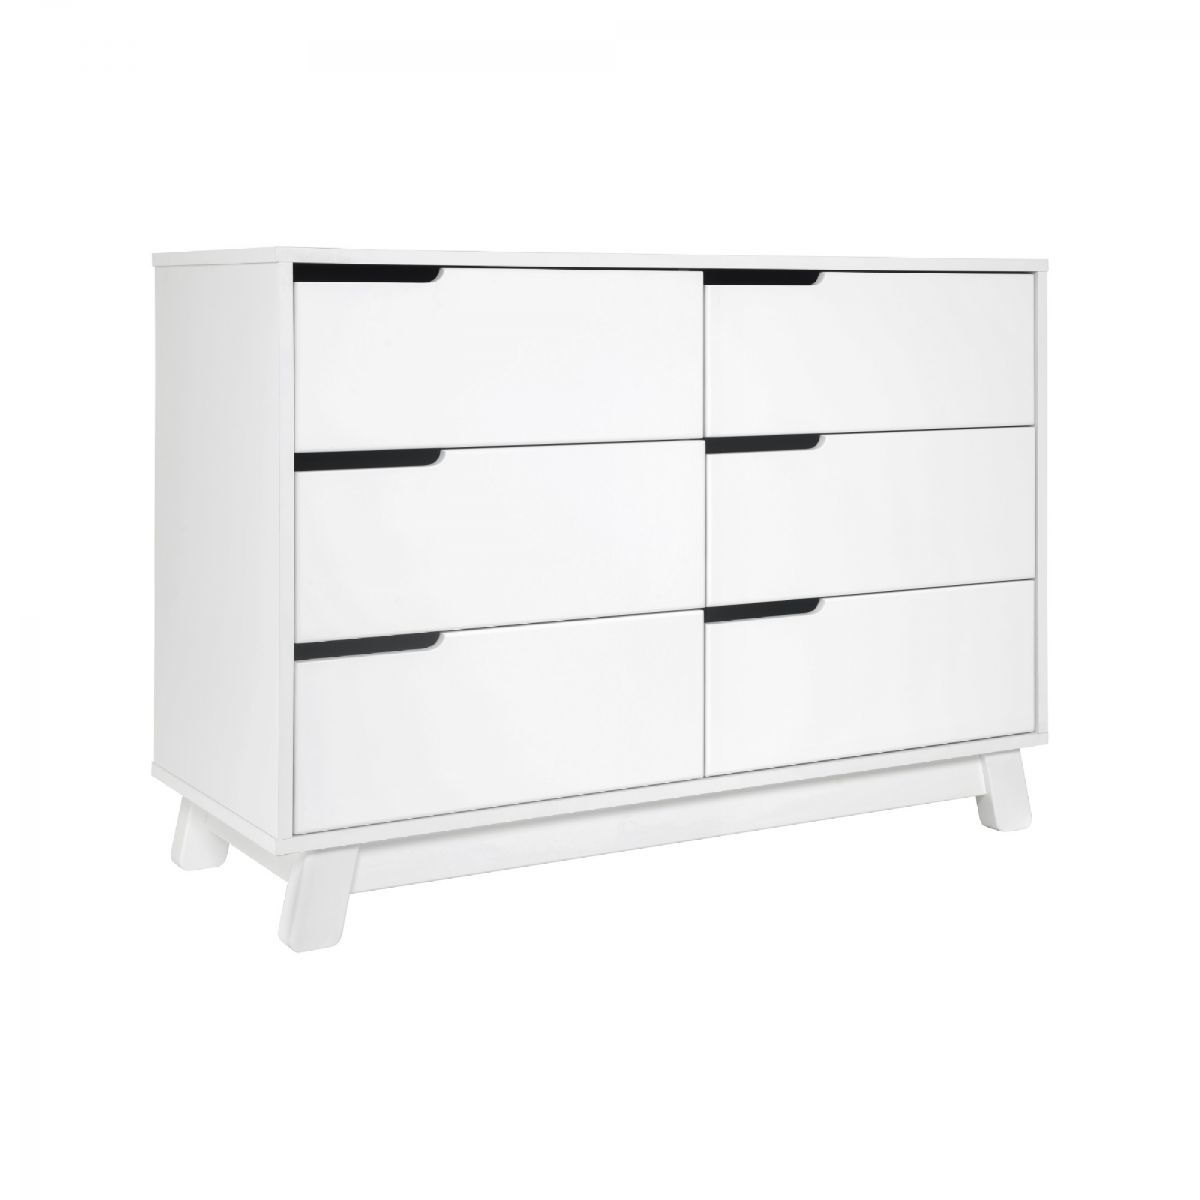 Hudson 6Drawer Double Dresser by BabyLetto